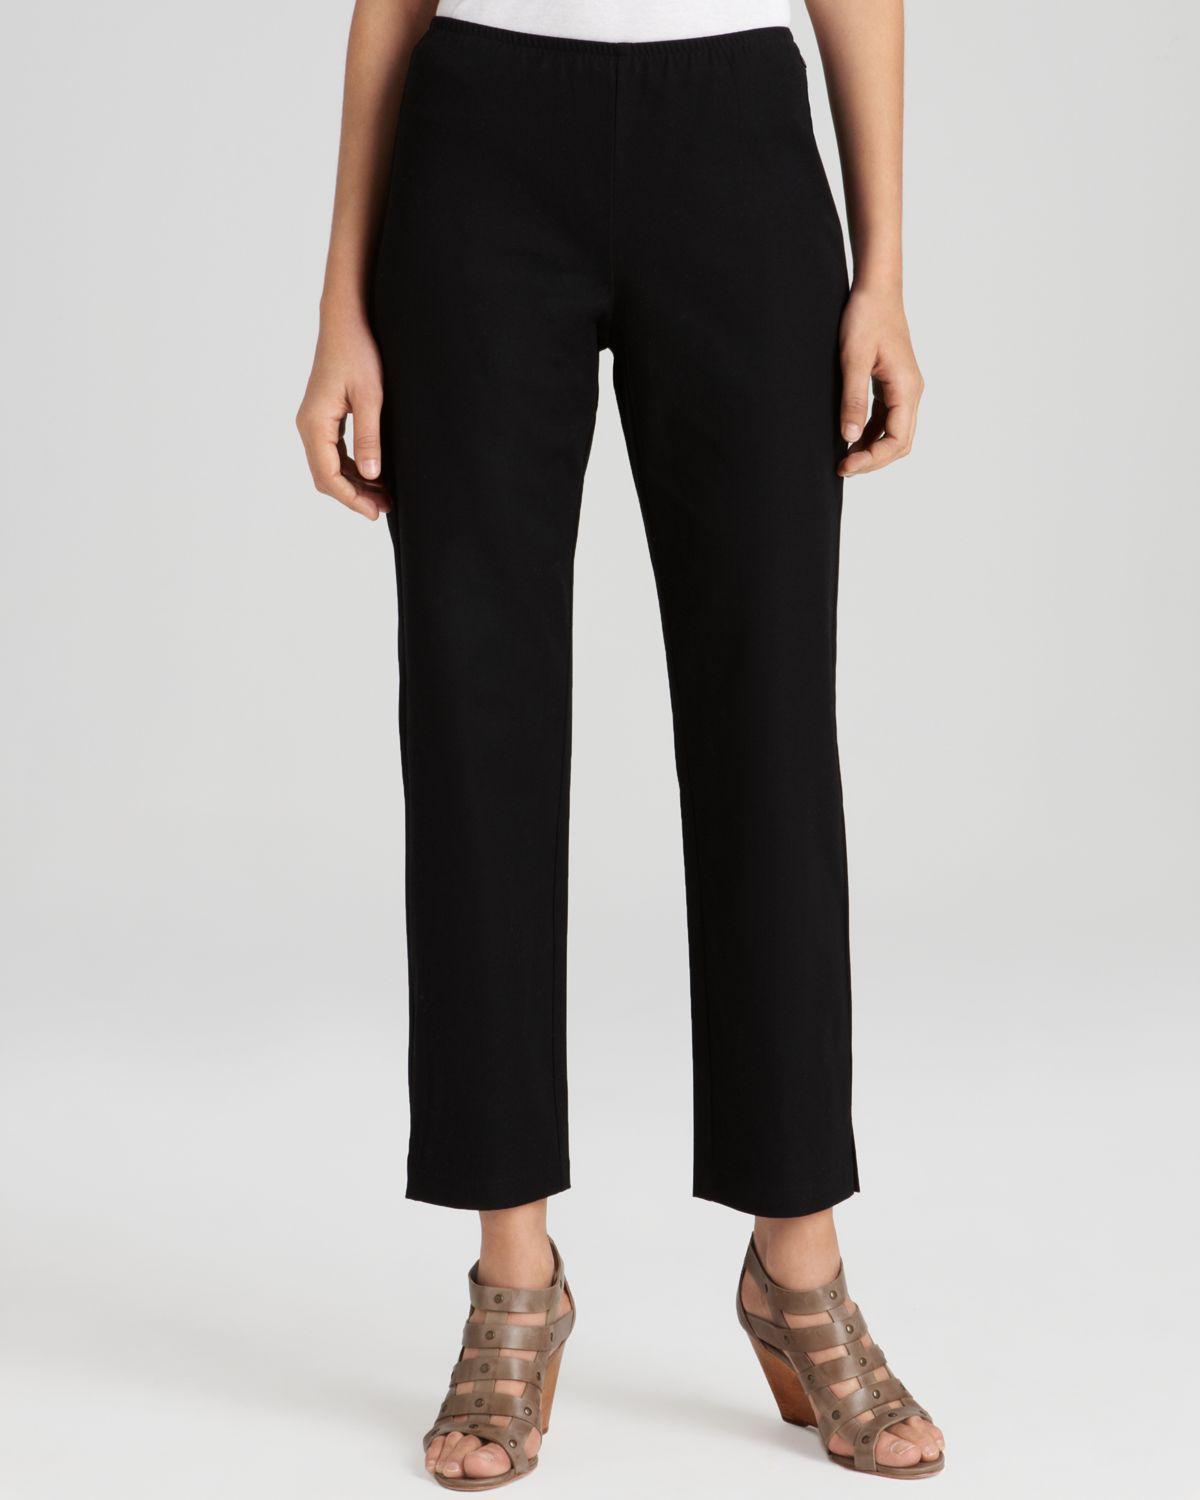 Lyst - Eileen fisher Slim Pants With Side Zip in Black - Save 41%